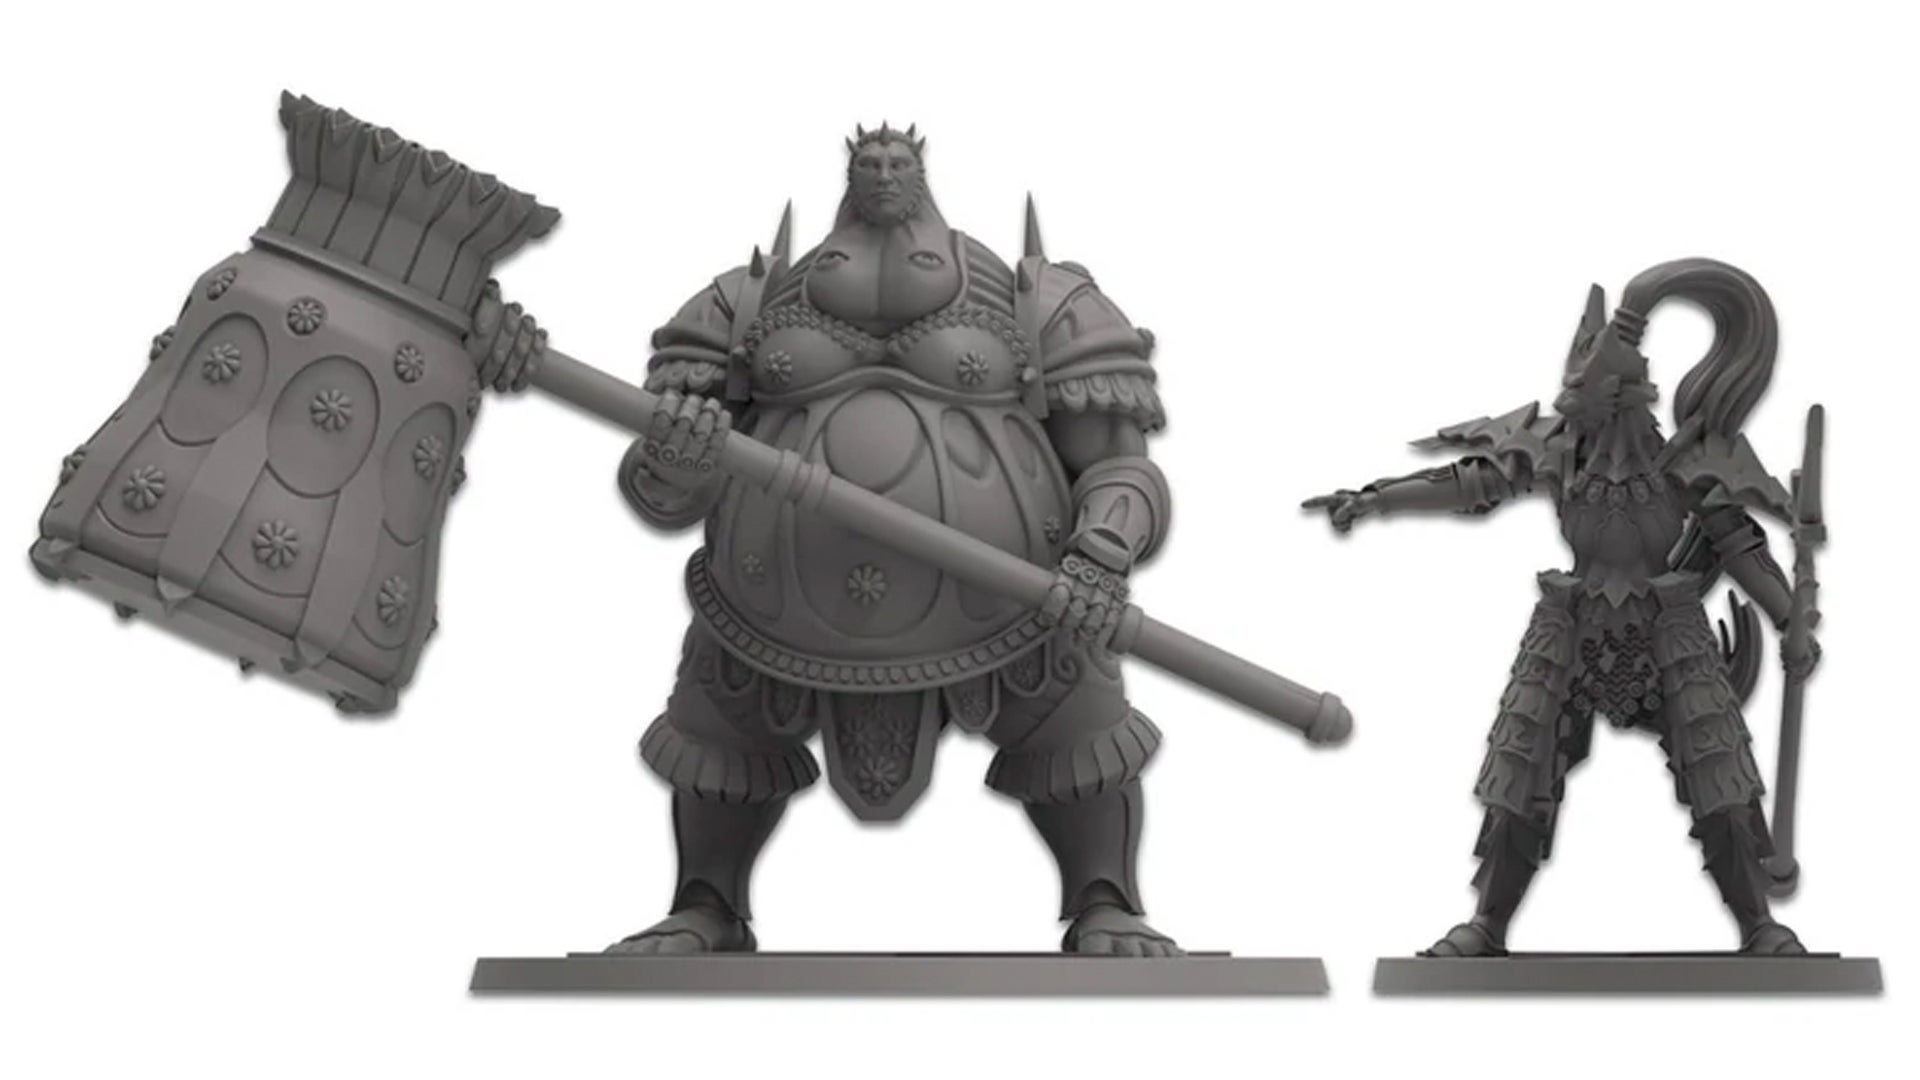 Image for Dark Souls RPG miniatures for bosses, enemies and characters coming later this year